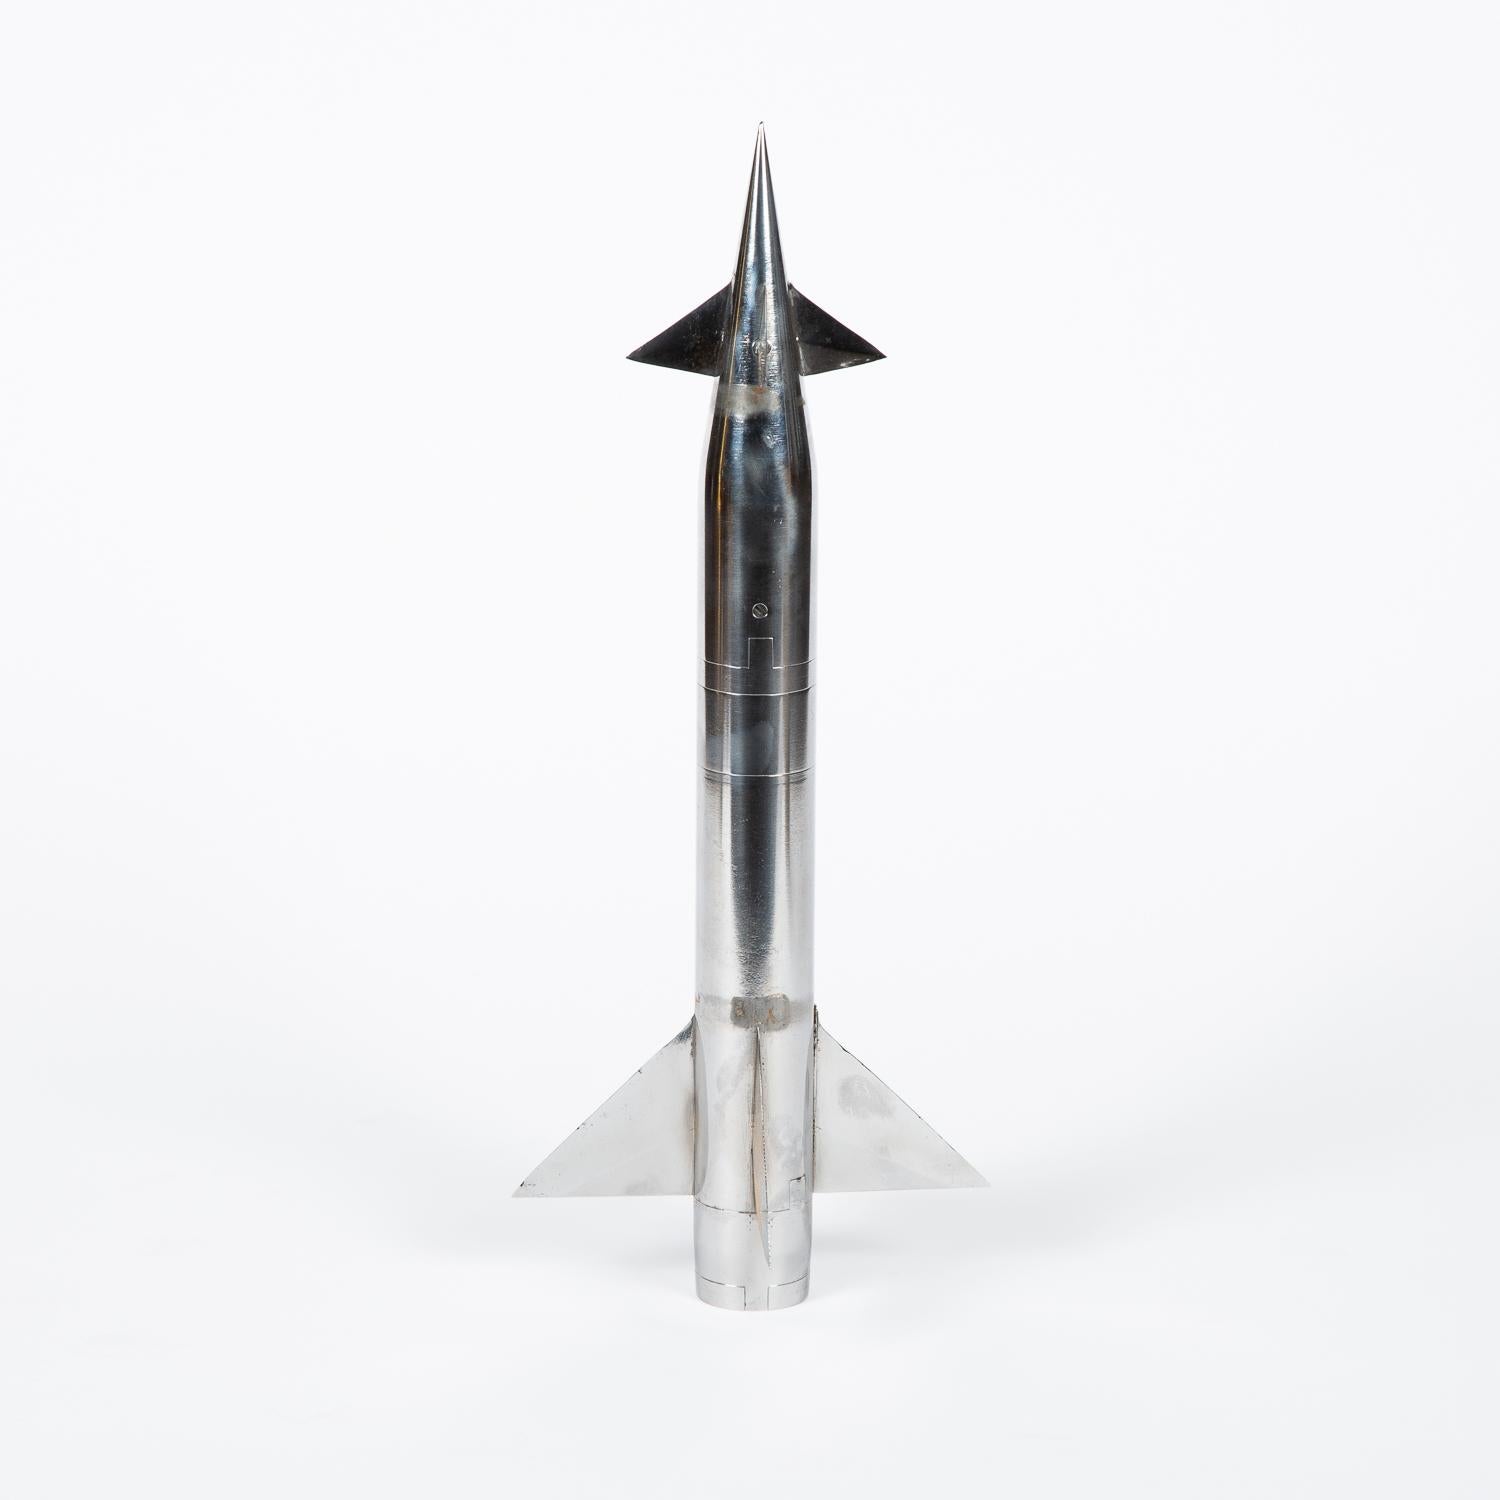 Wind Tunnel Model of a French Sounding Rocket 6